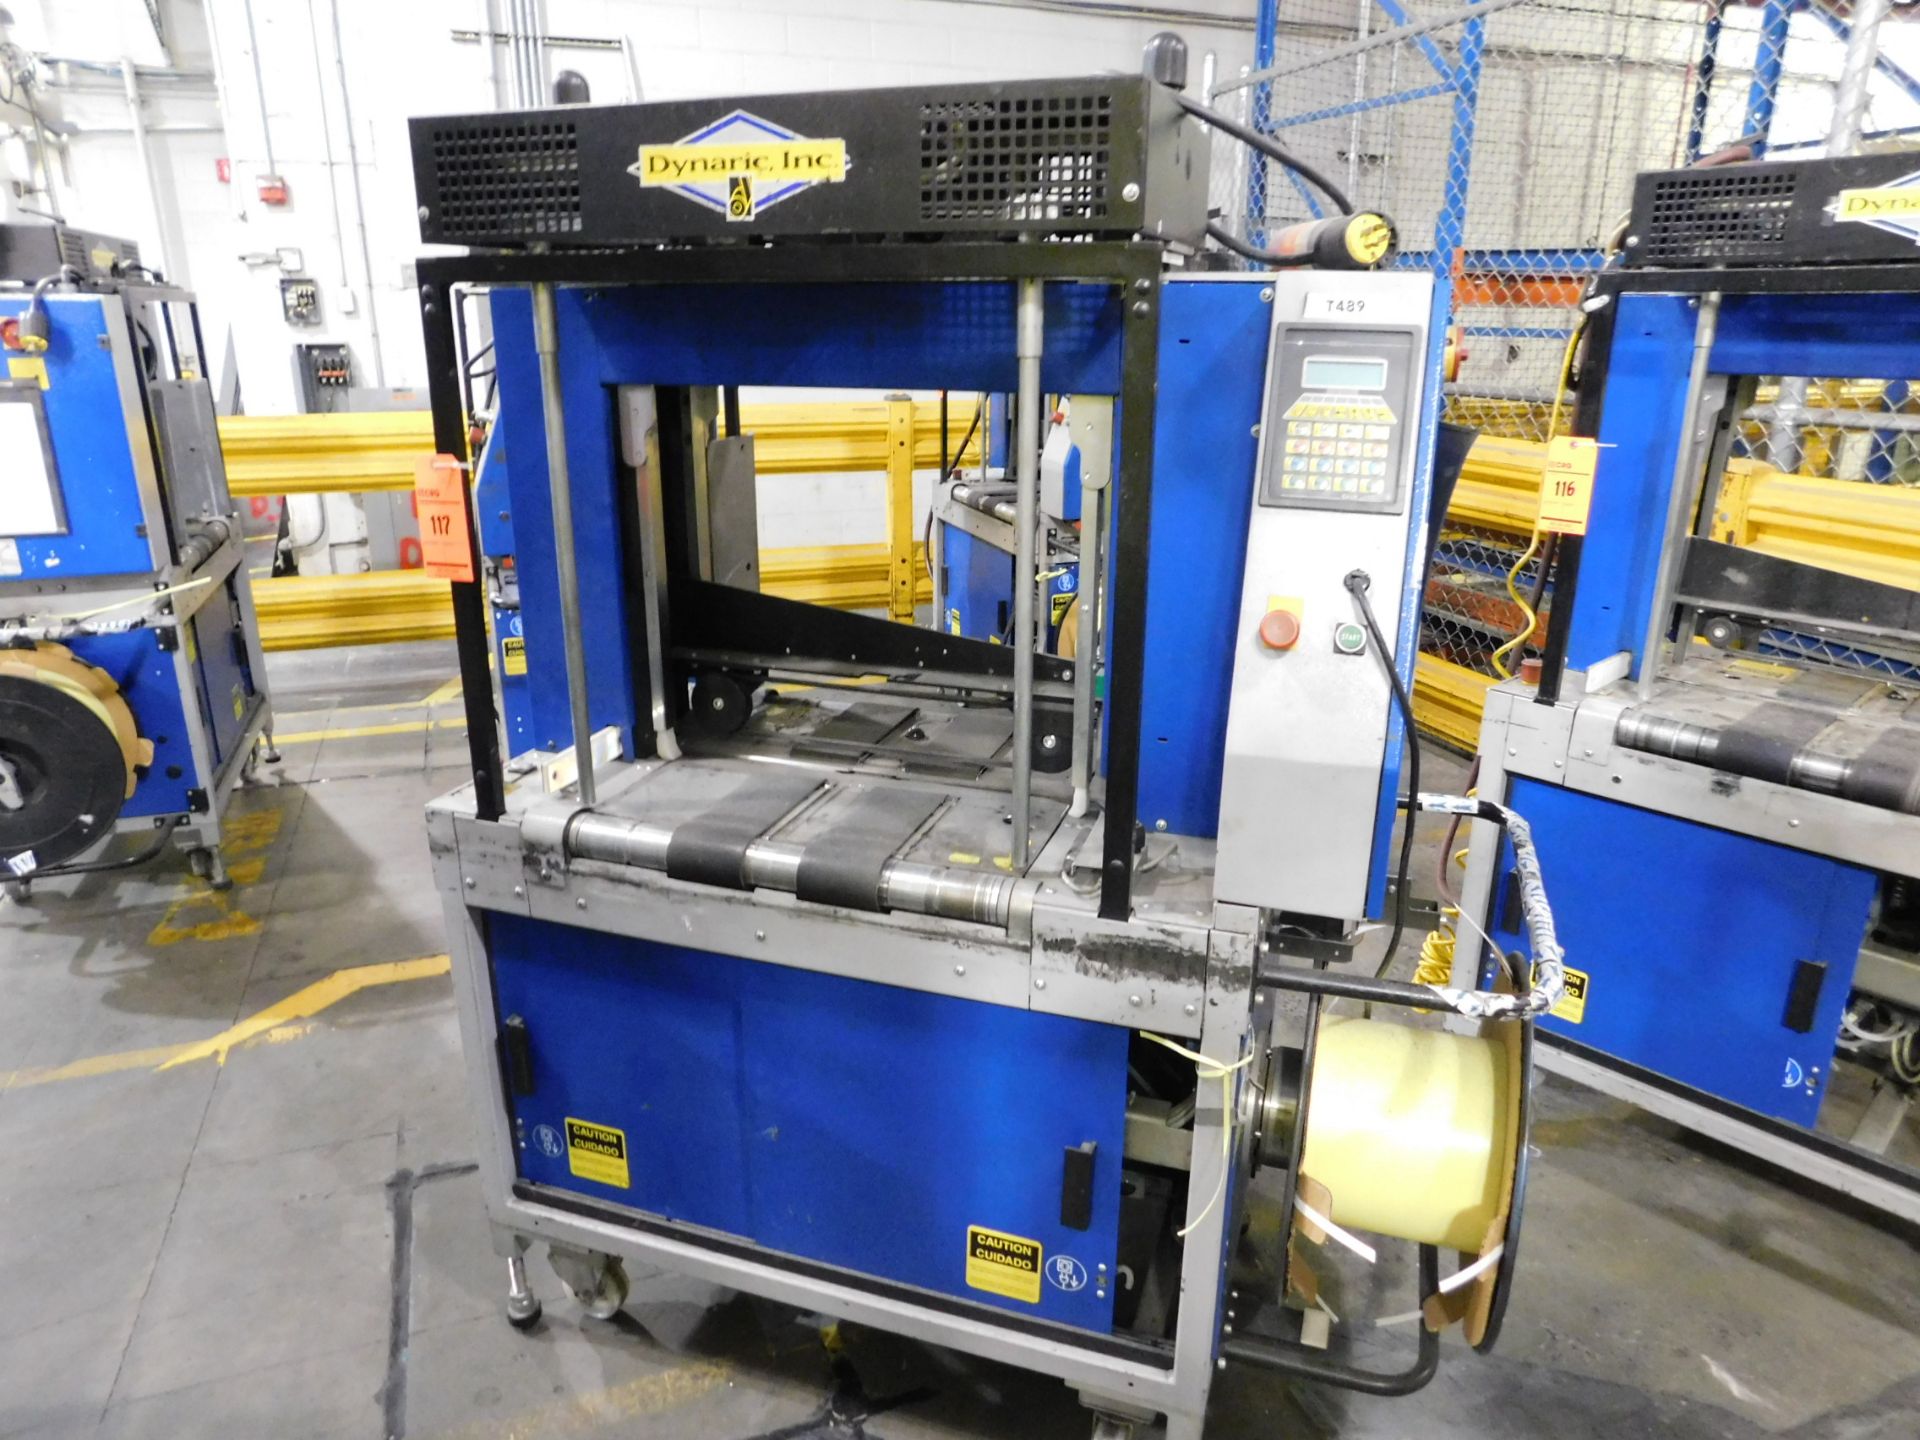 Dynark banding machine with discharge roller conveyor, 5 ft. long by 18 in. wide, mobile, asset #